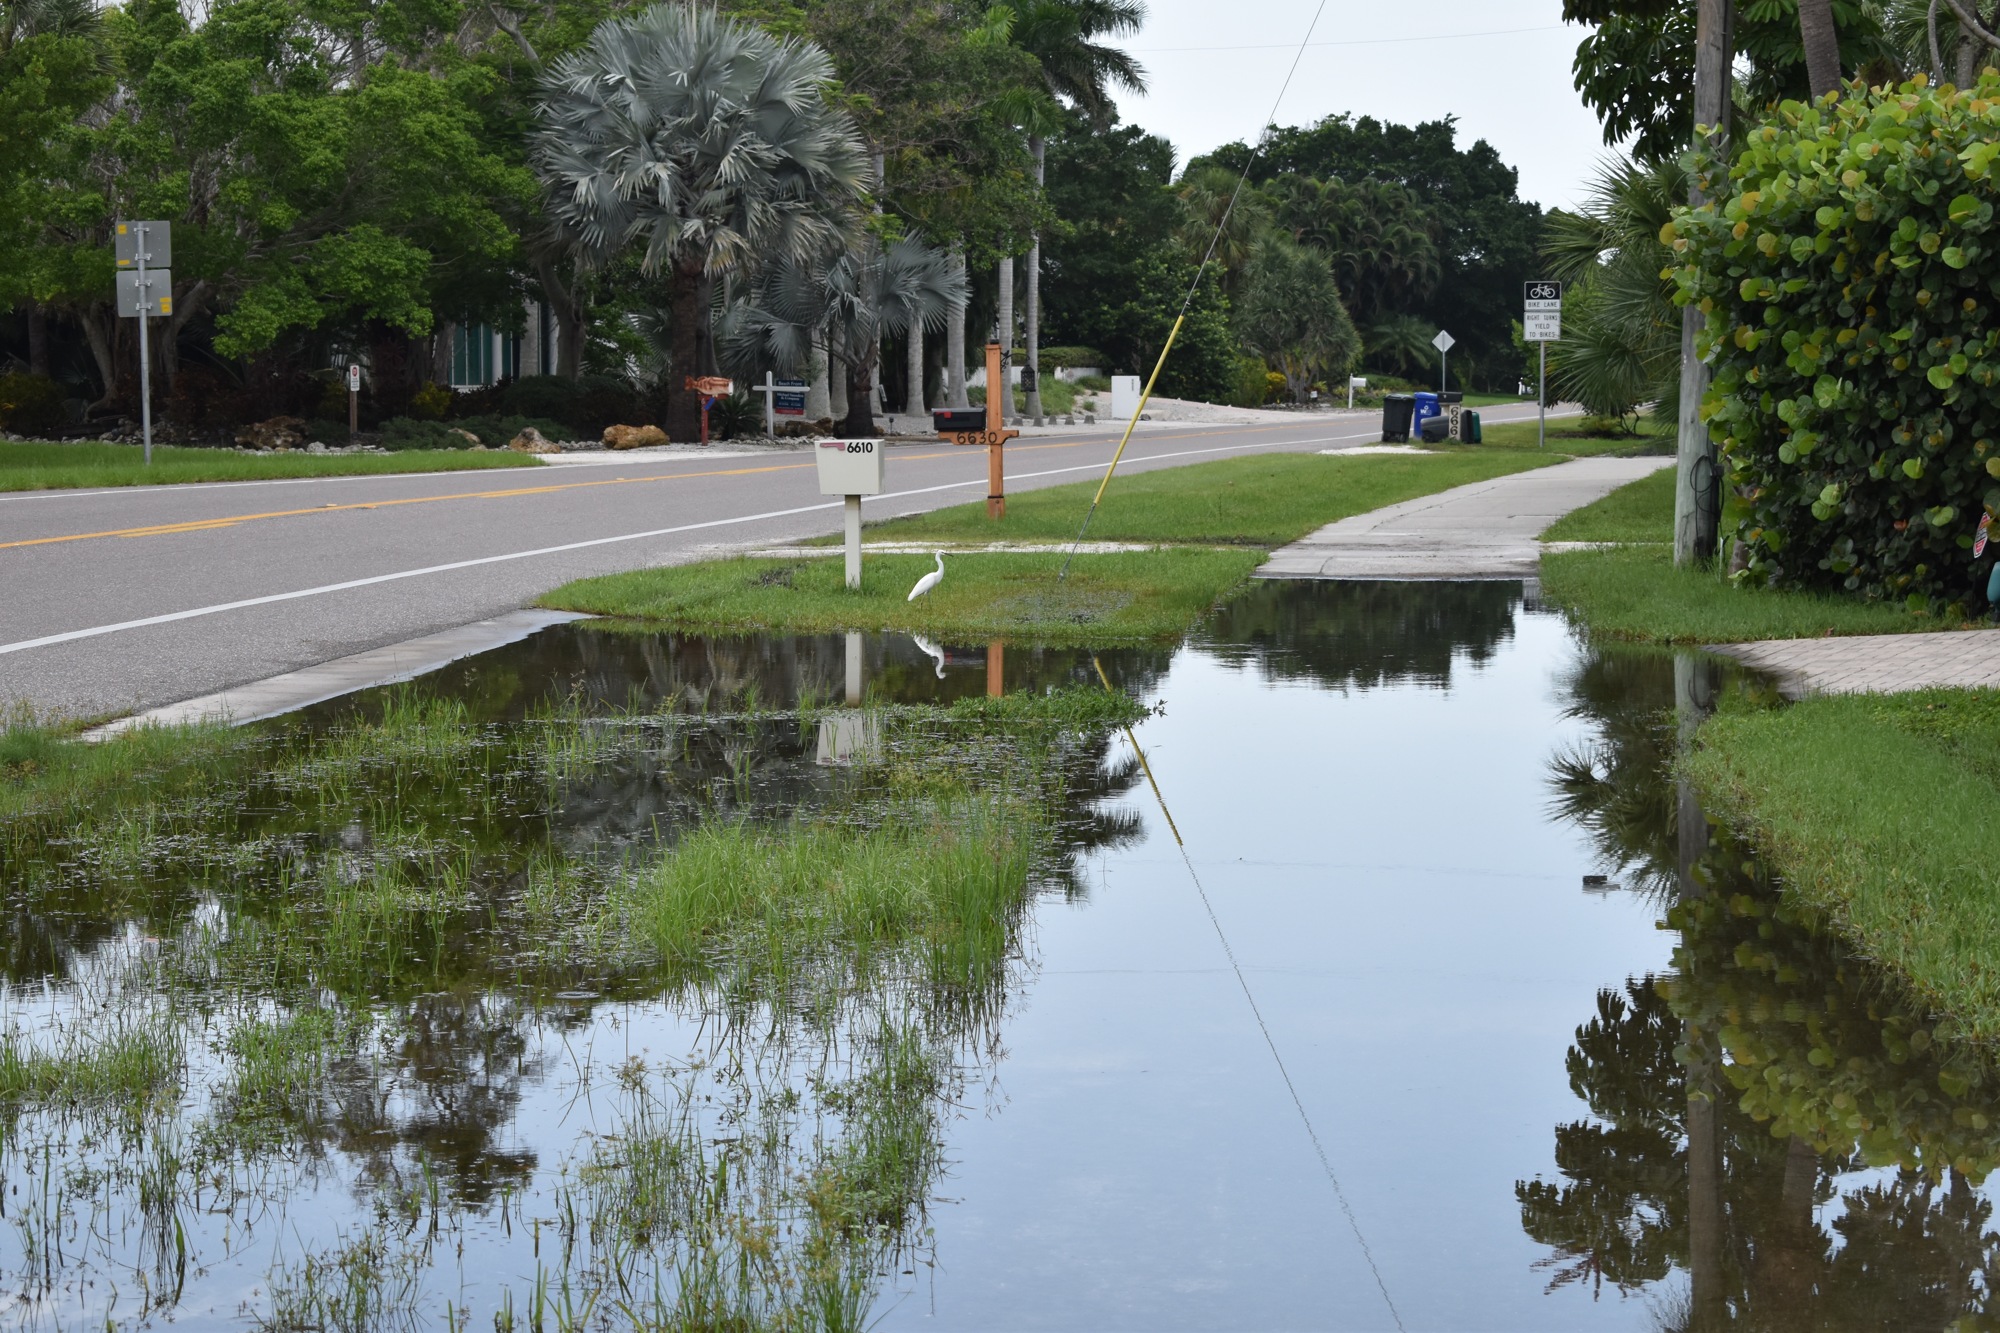 Along Gulf of Mexico Drive on Monday, August 19, 2019. Photo by Sten Spinella.